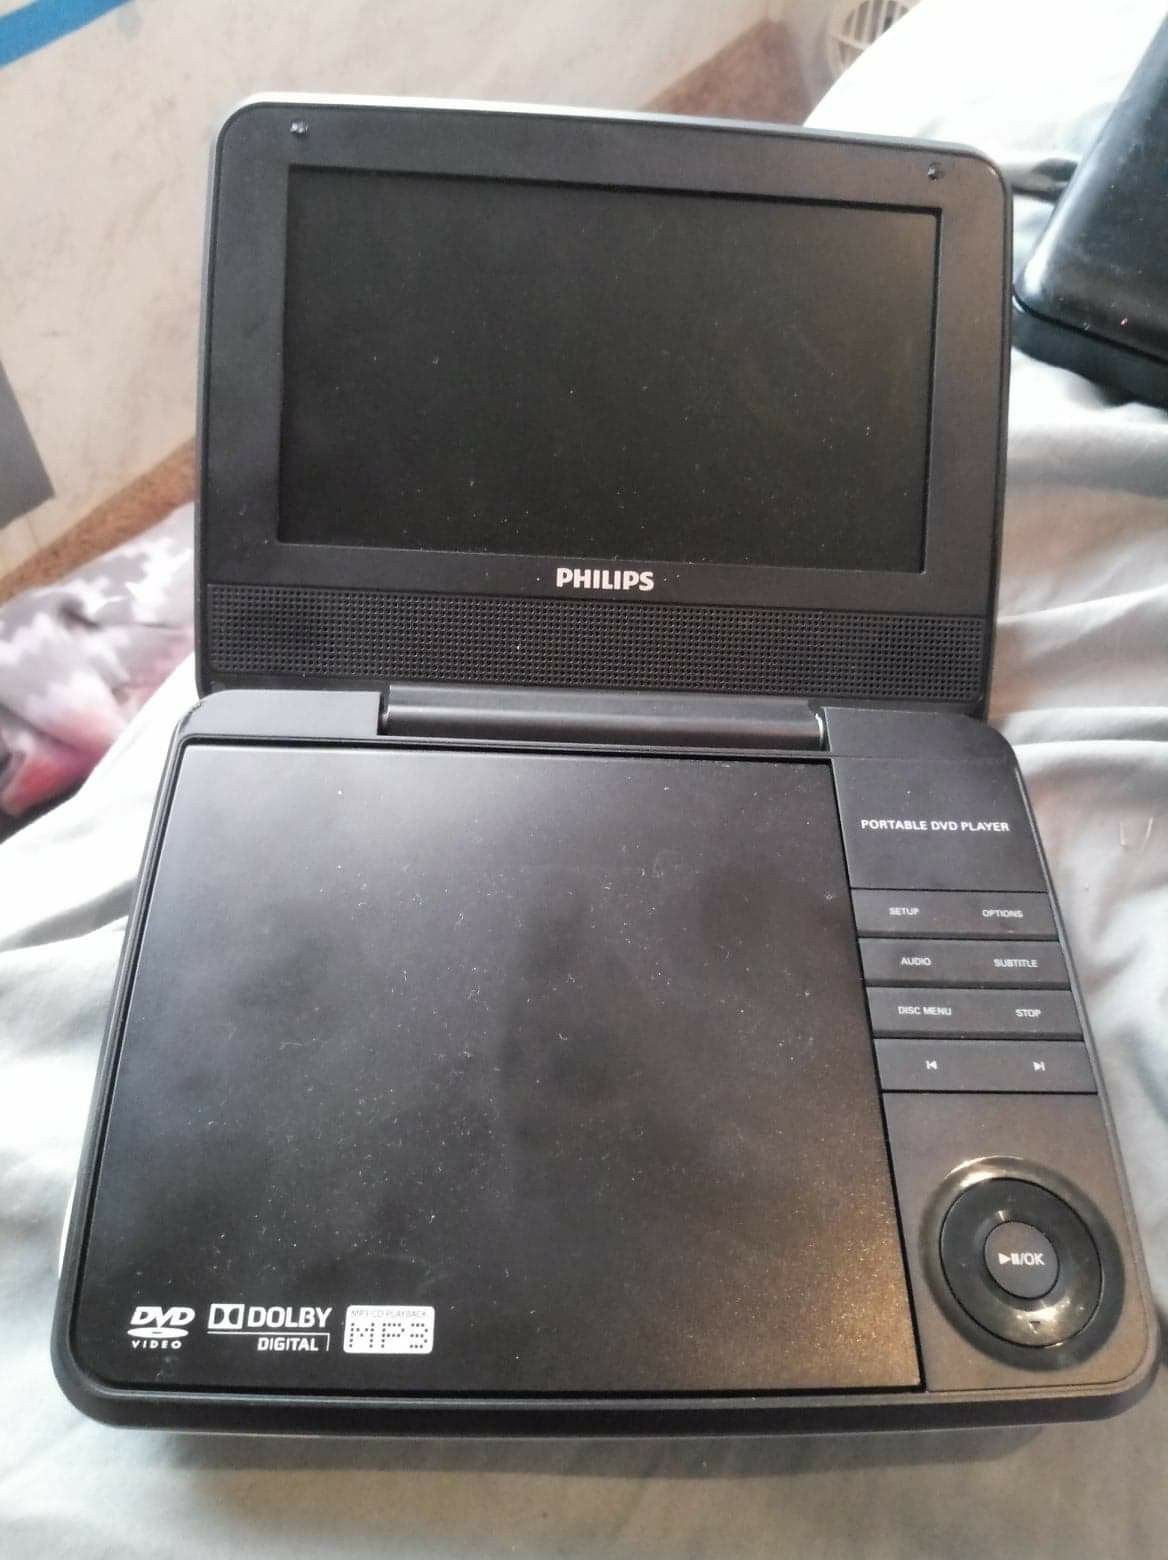 Phillips portable dvd player